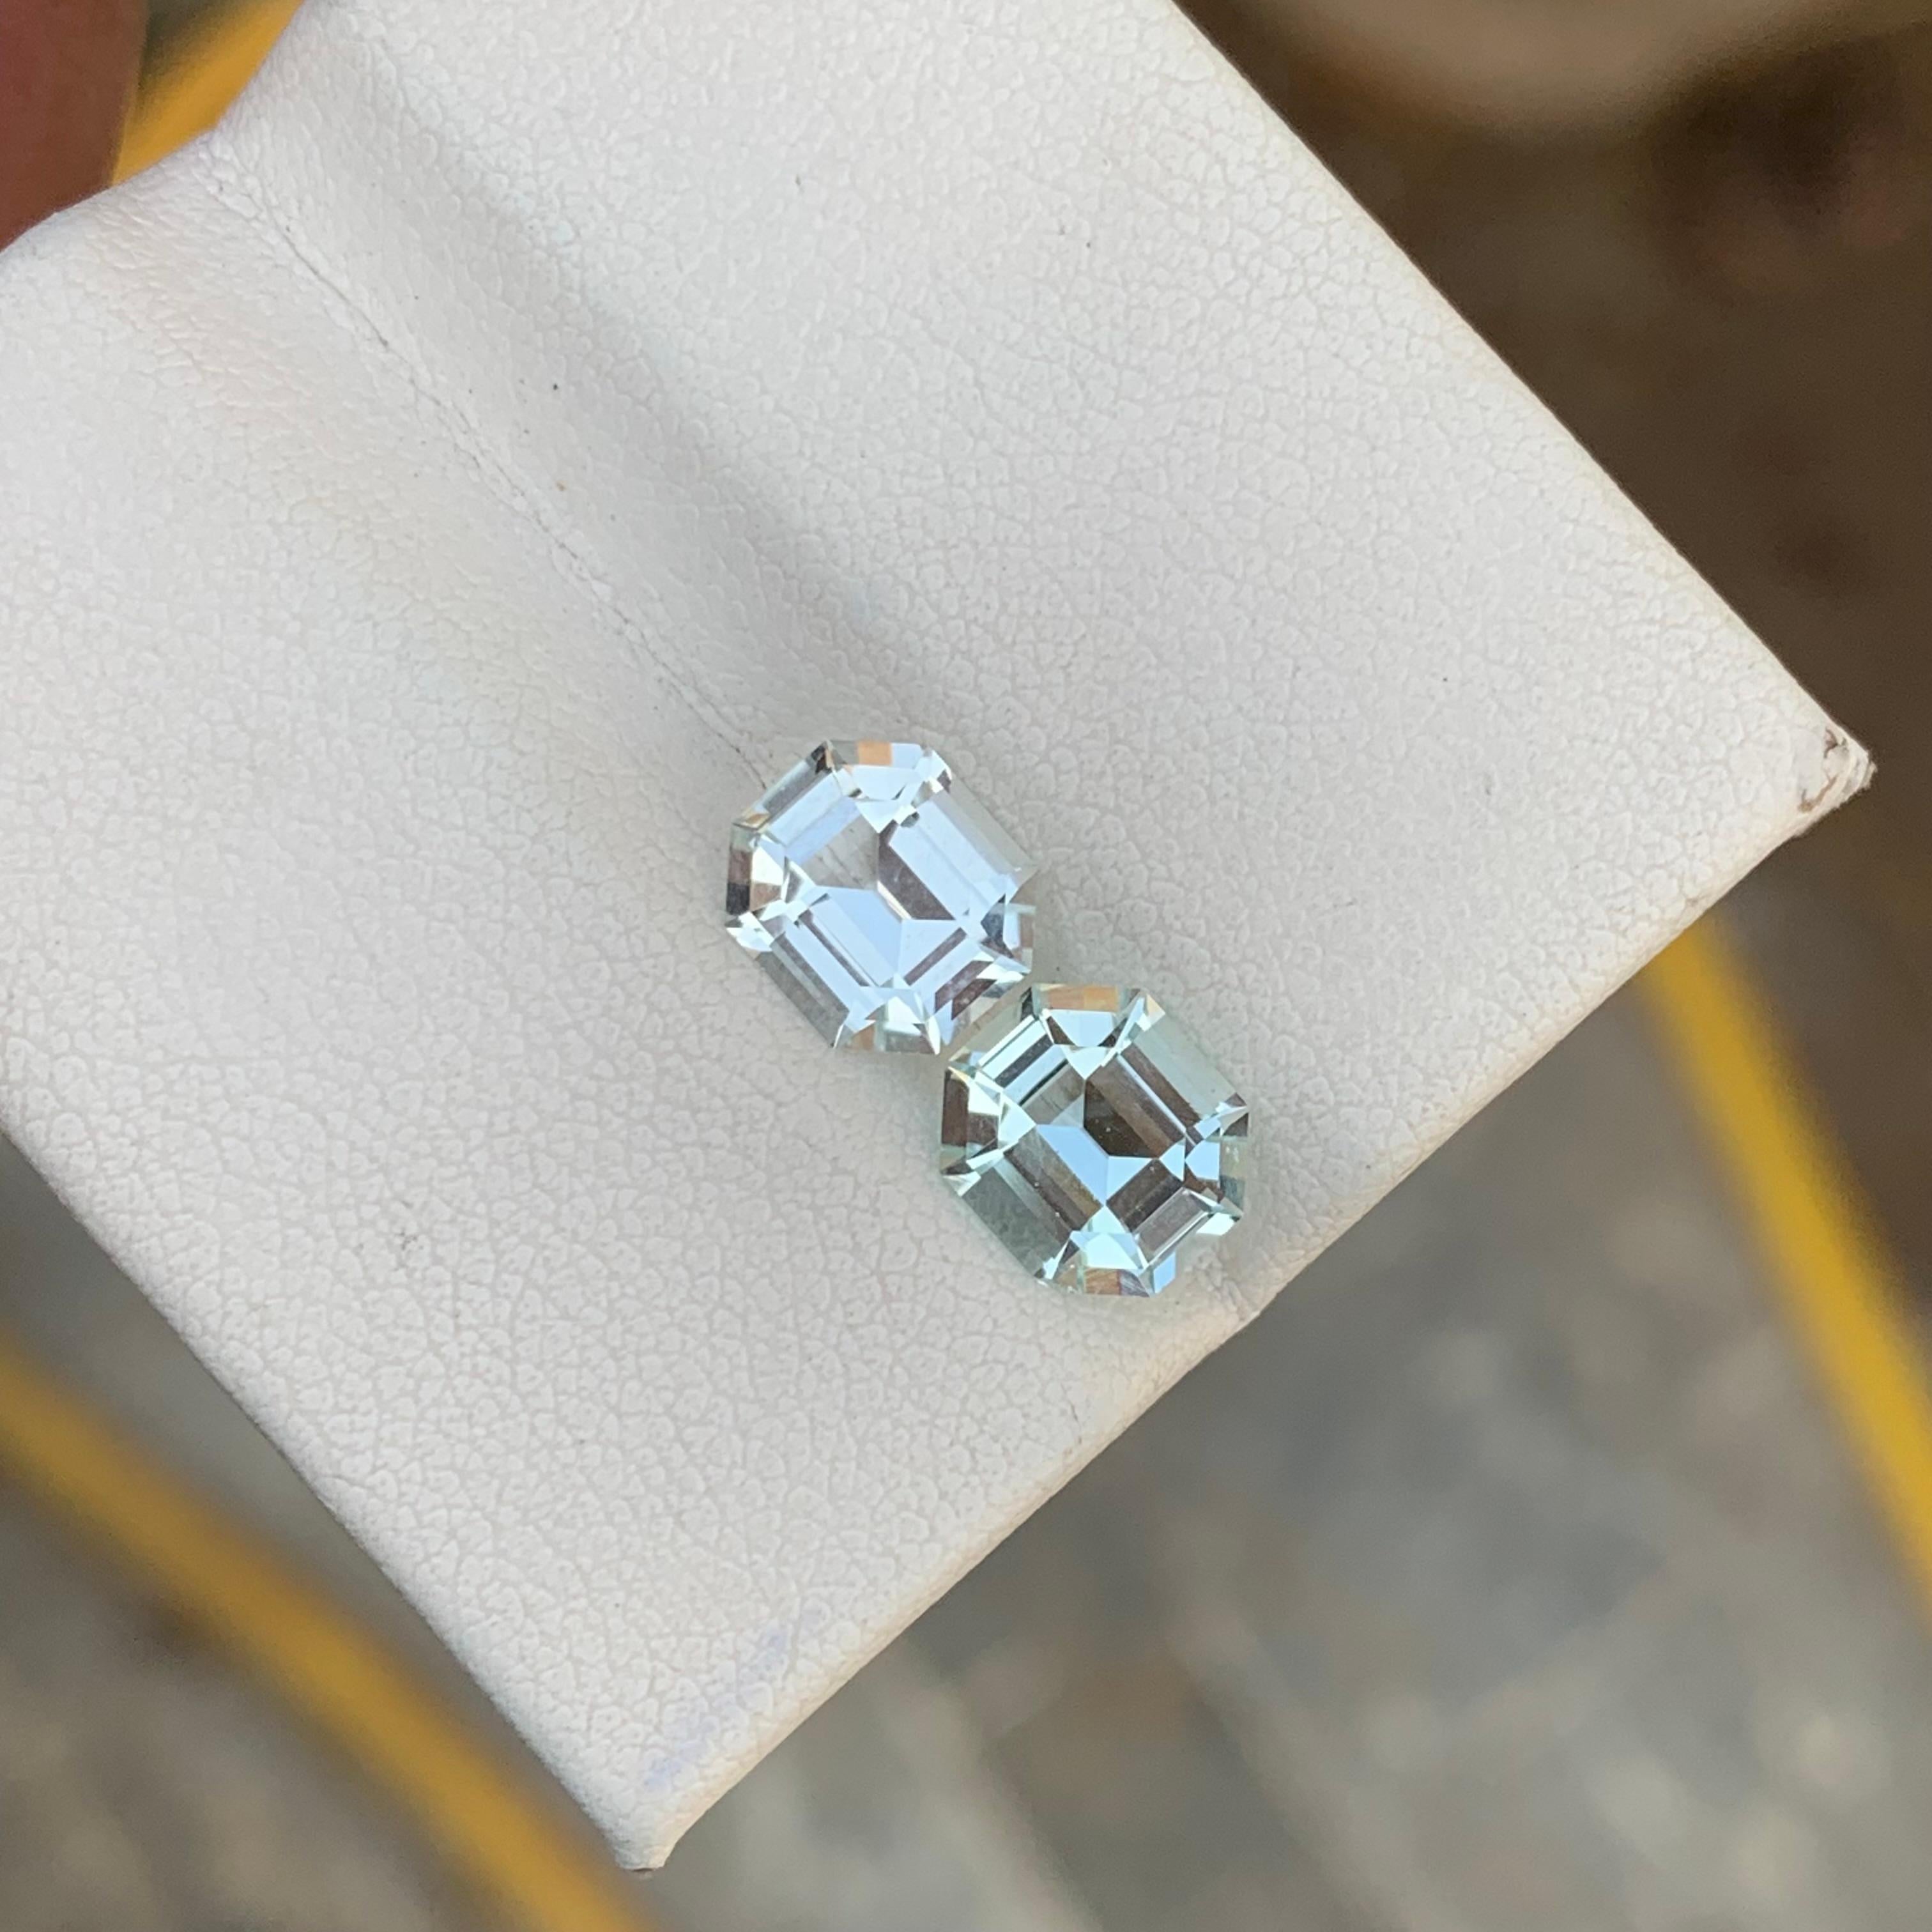 Gorgeous Natural Loose Aquamarine Pair For Earrings Jewelry 3.05 Carats  9